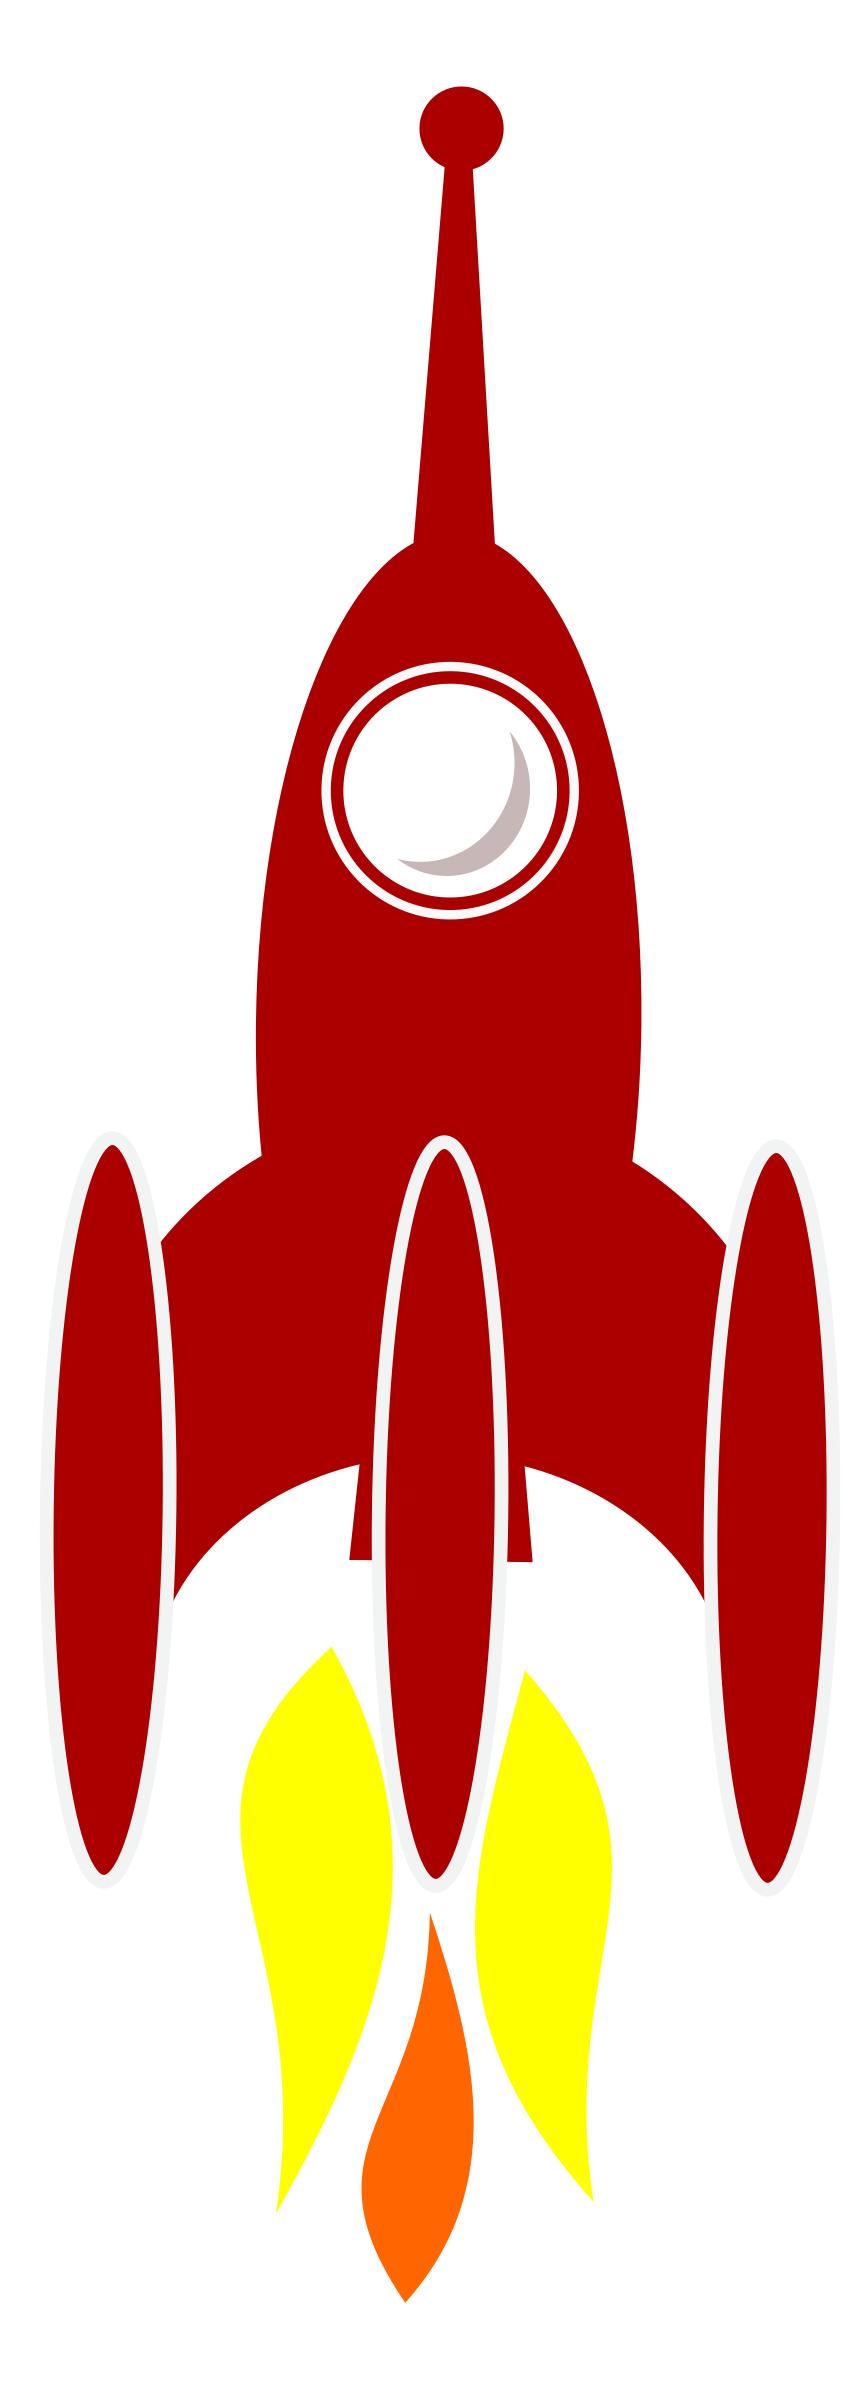 3 Booster Rocket PNG icons